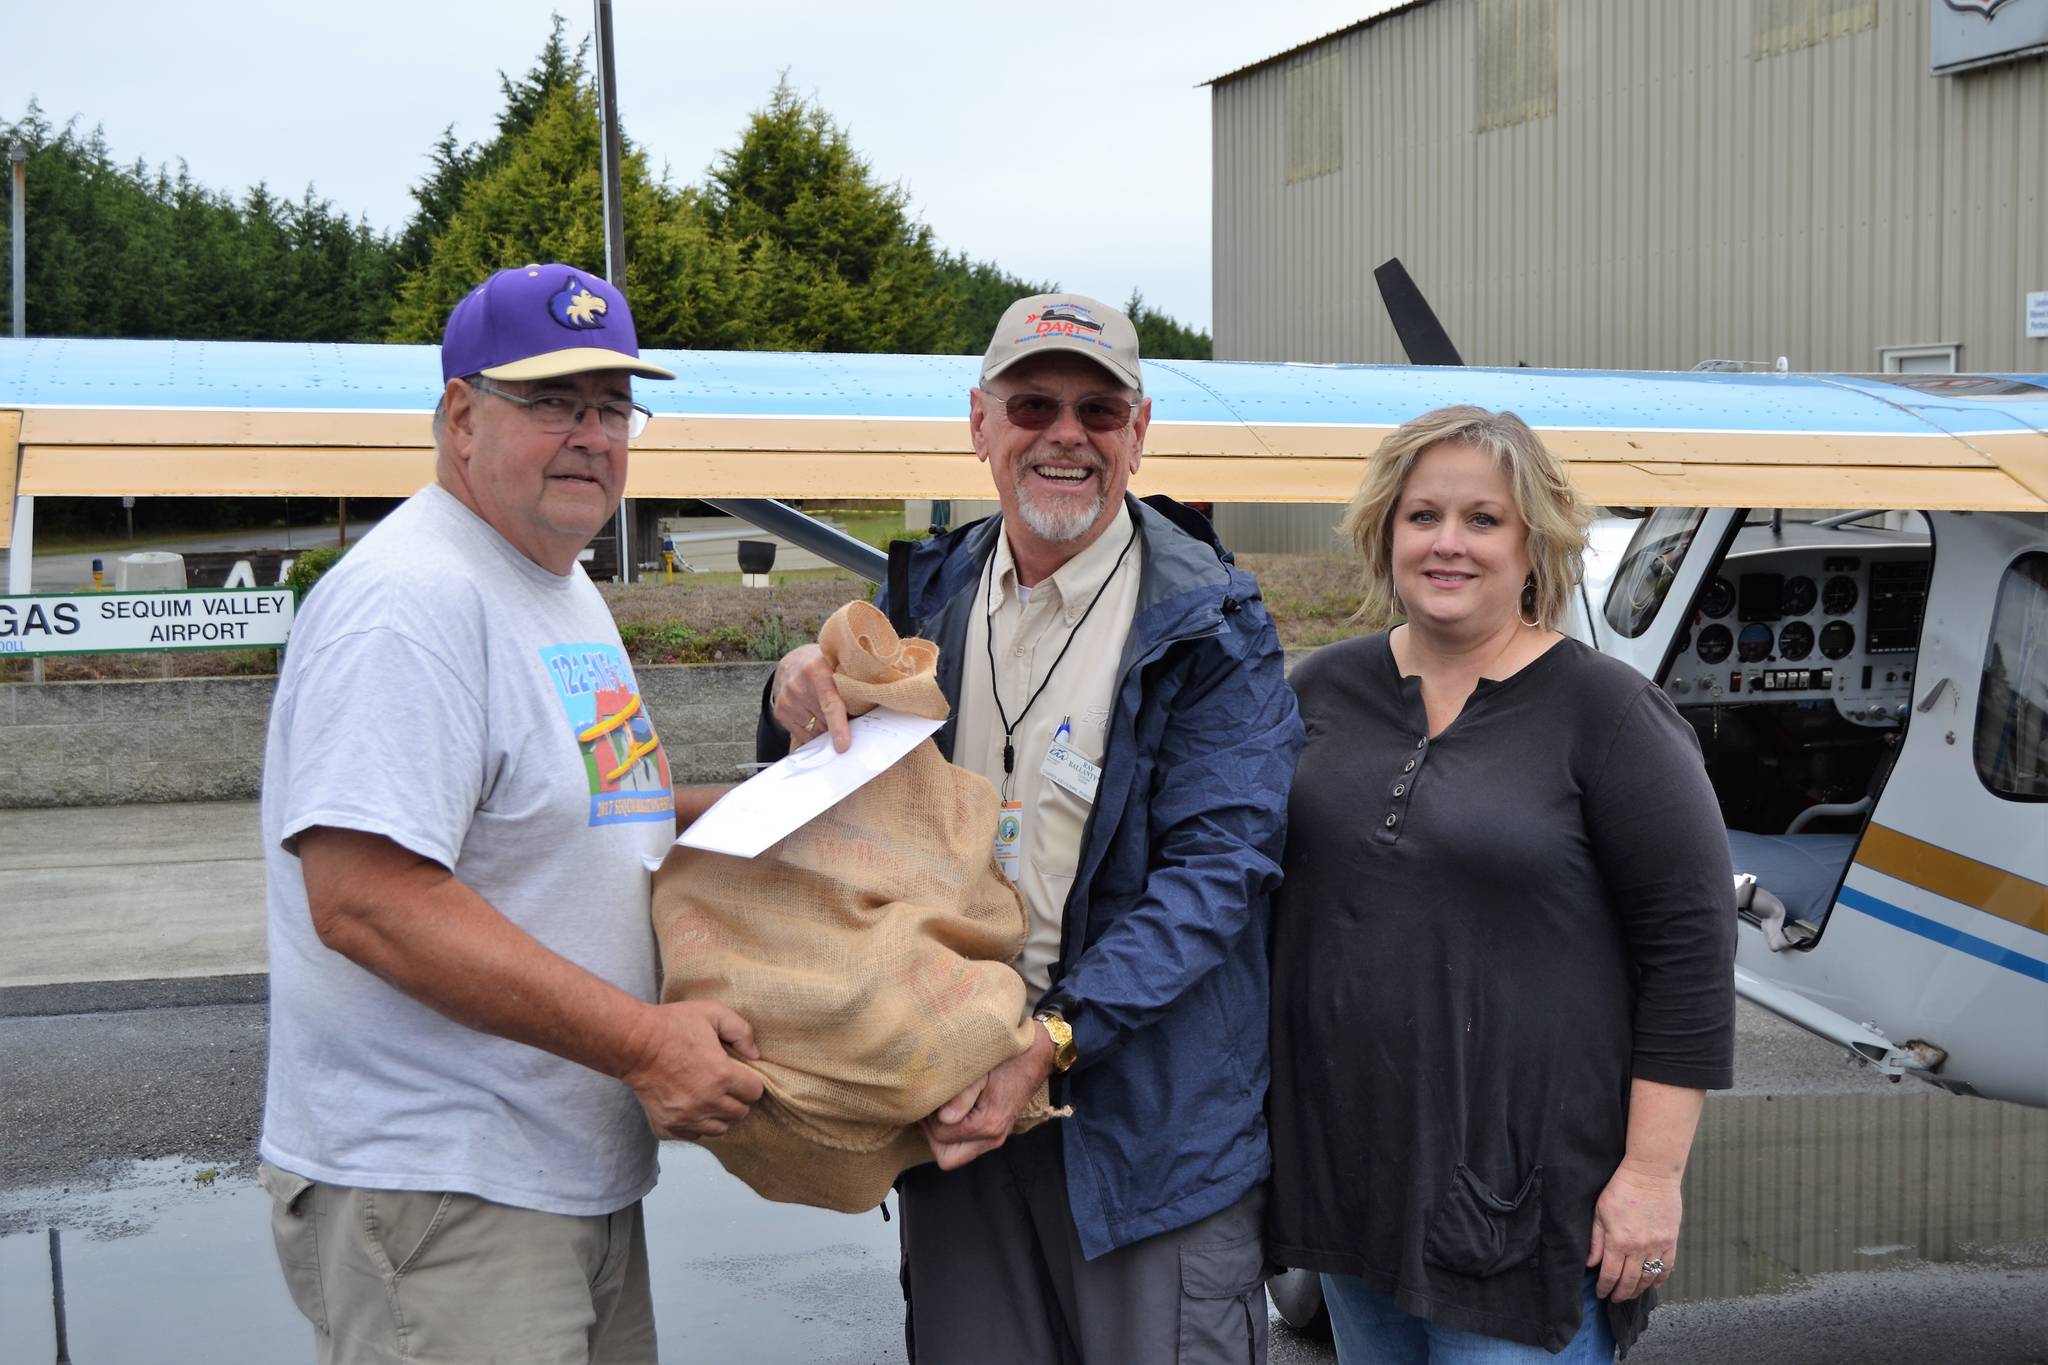 For the first of three trips, Ray Ballantyne, a volunteer with Disaster Aircraft Response Team (DART), in middle, hands a bag of food to Stephen Rosales, Sequim Food Bank board president, and Andra Smith, Sequim Food Bank executive director, on Sept. 15, at the Sequim Valley Airport. The event was a coordinated through DART to test a response plan following a catastrophic event and merged into a food drive, as well. Sequim Gazette photo by Matthew Nash